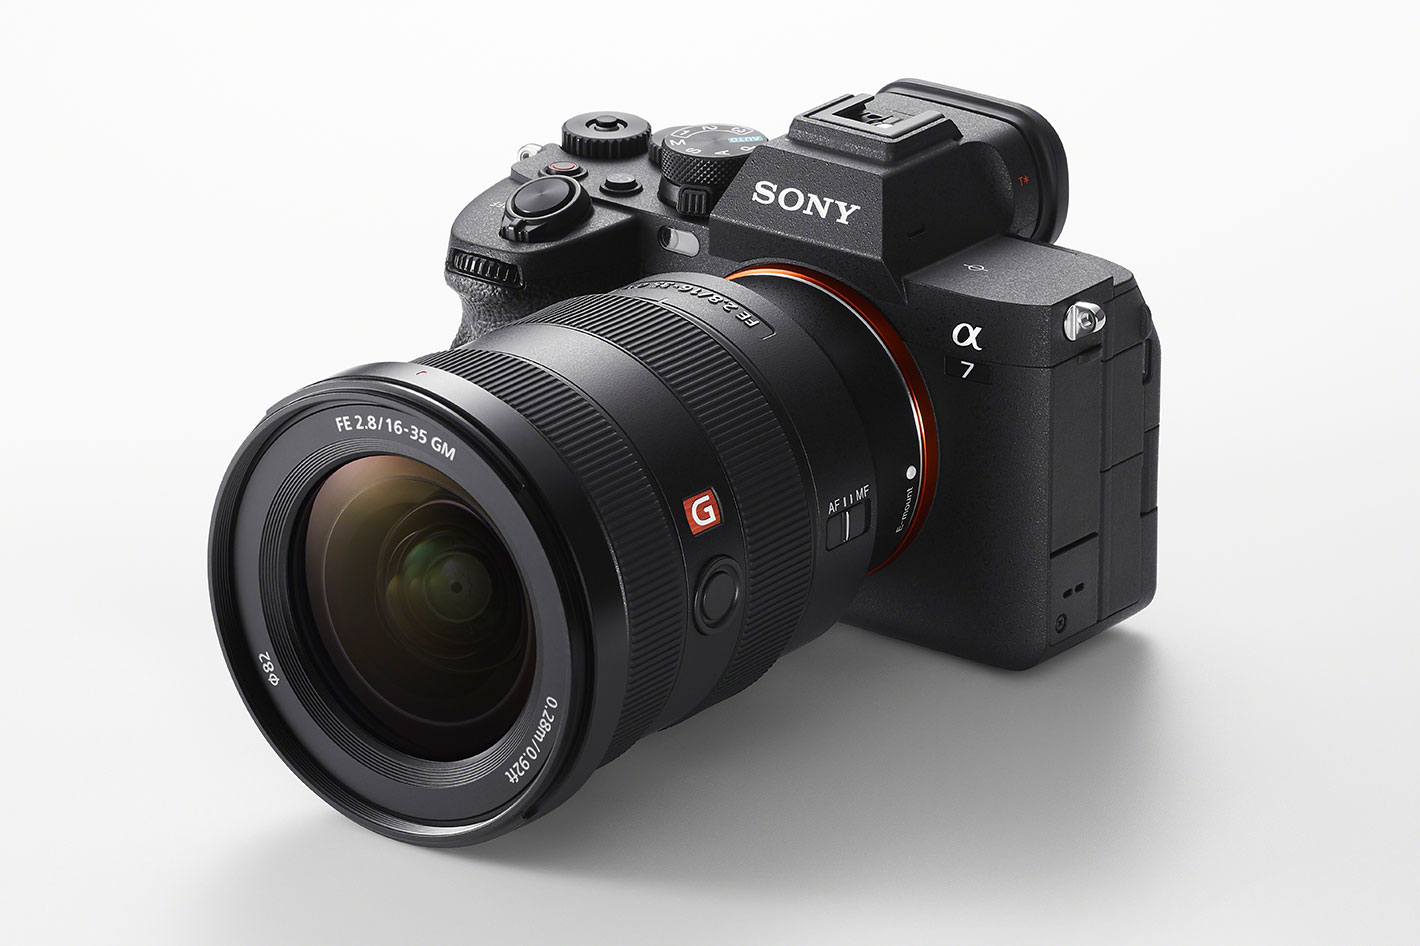 New Sony Alpha 7 IV mirrorless takes “basic” to the next level by Jose  Antunes - ProVideo Coalition